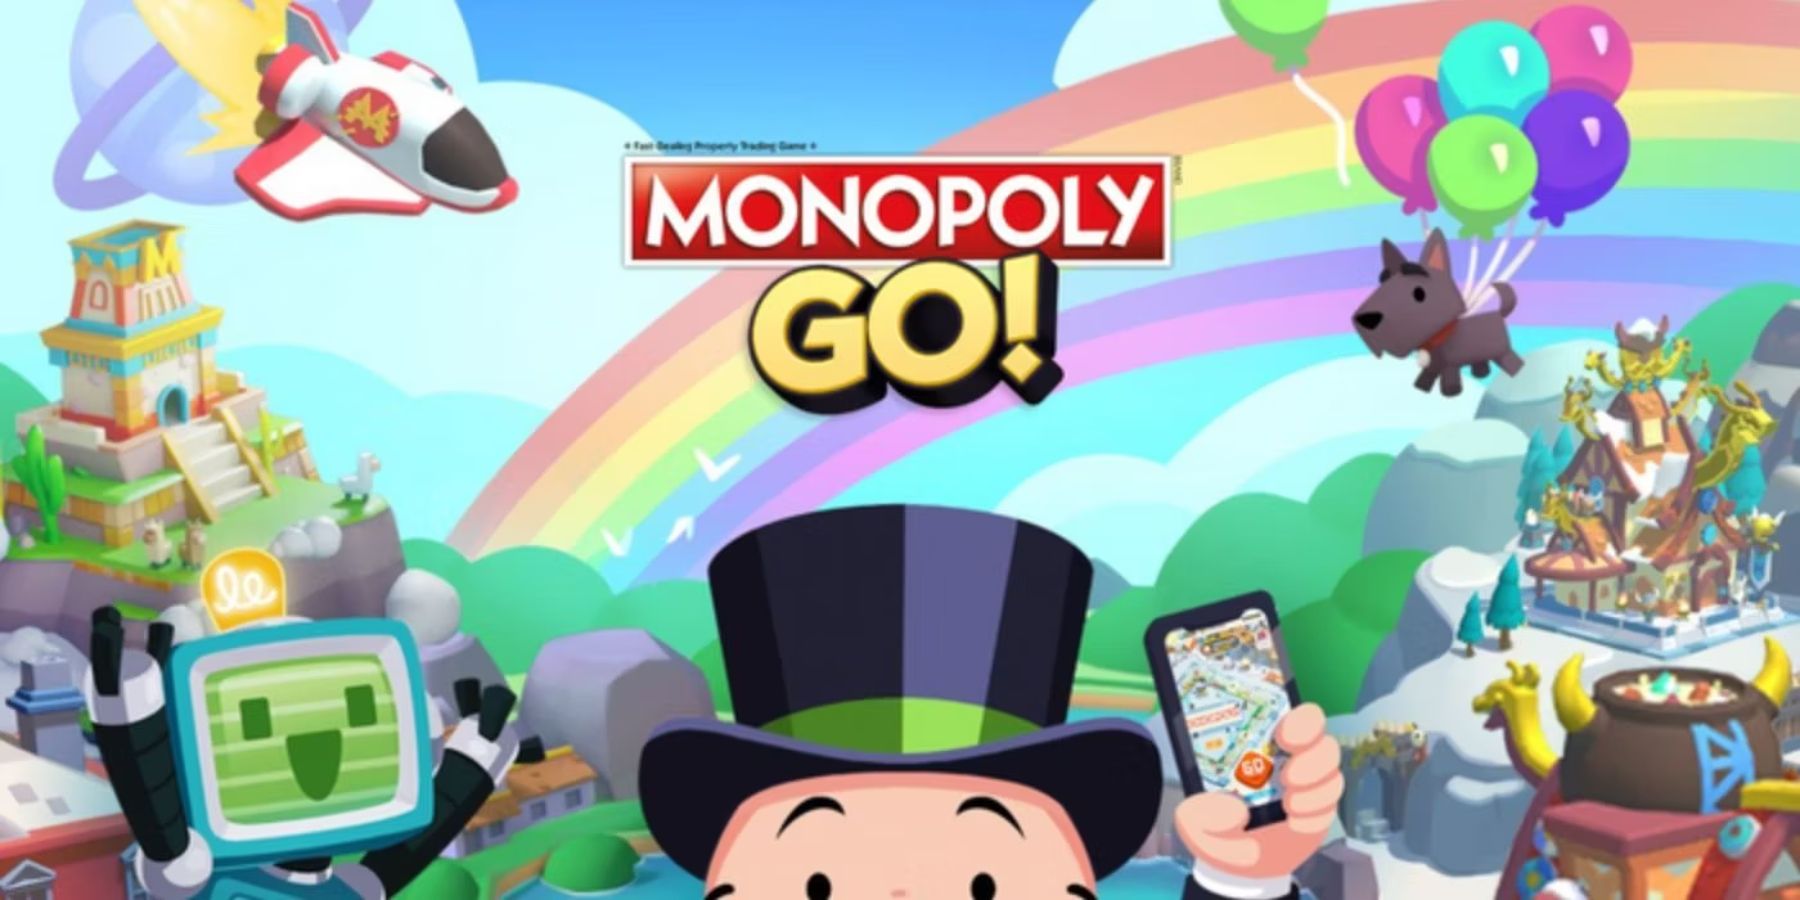 Milburn Pennybags holding a mobile phone in front of the Monopoly GO! logo